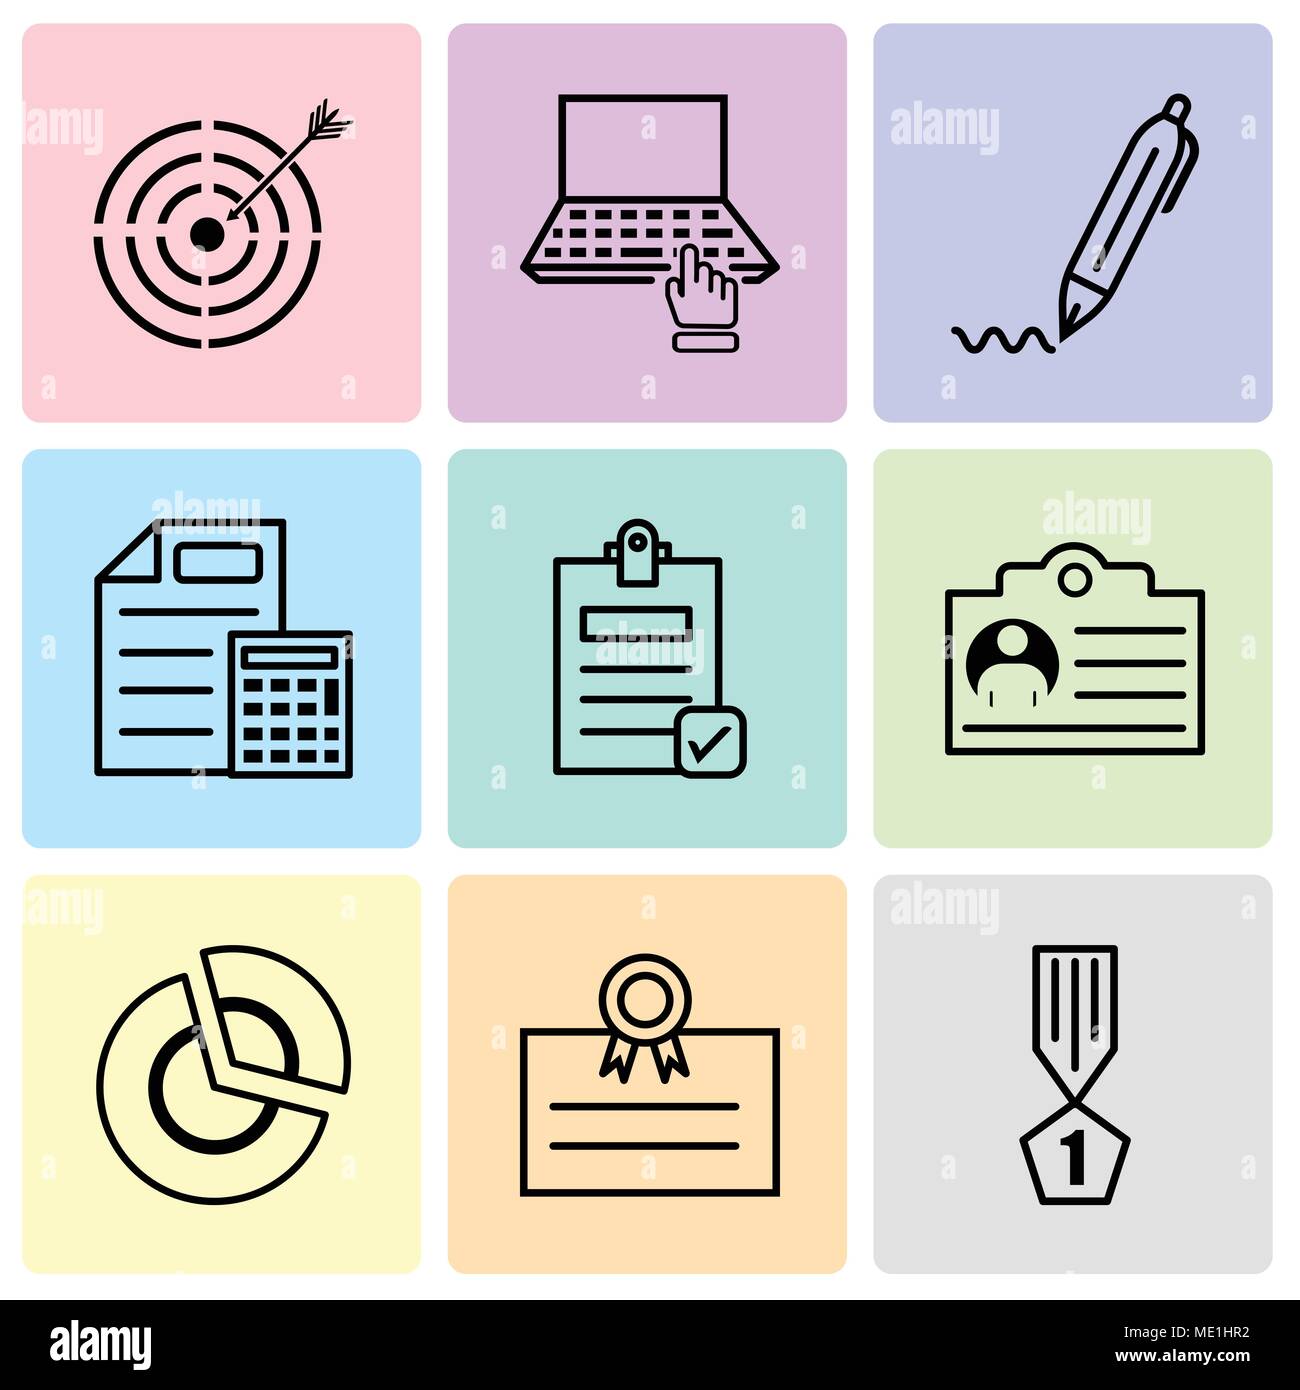 Set Of 9 simple editable icons such as winner, postcard, pie chart, document, Check document, document & calculator, pen, computer, target, can be use Stock Vector